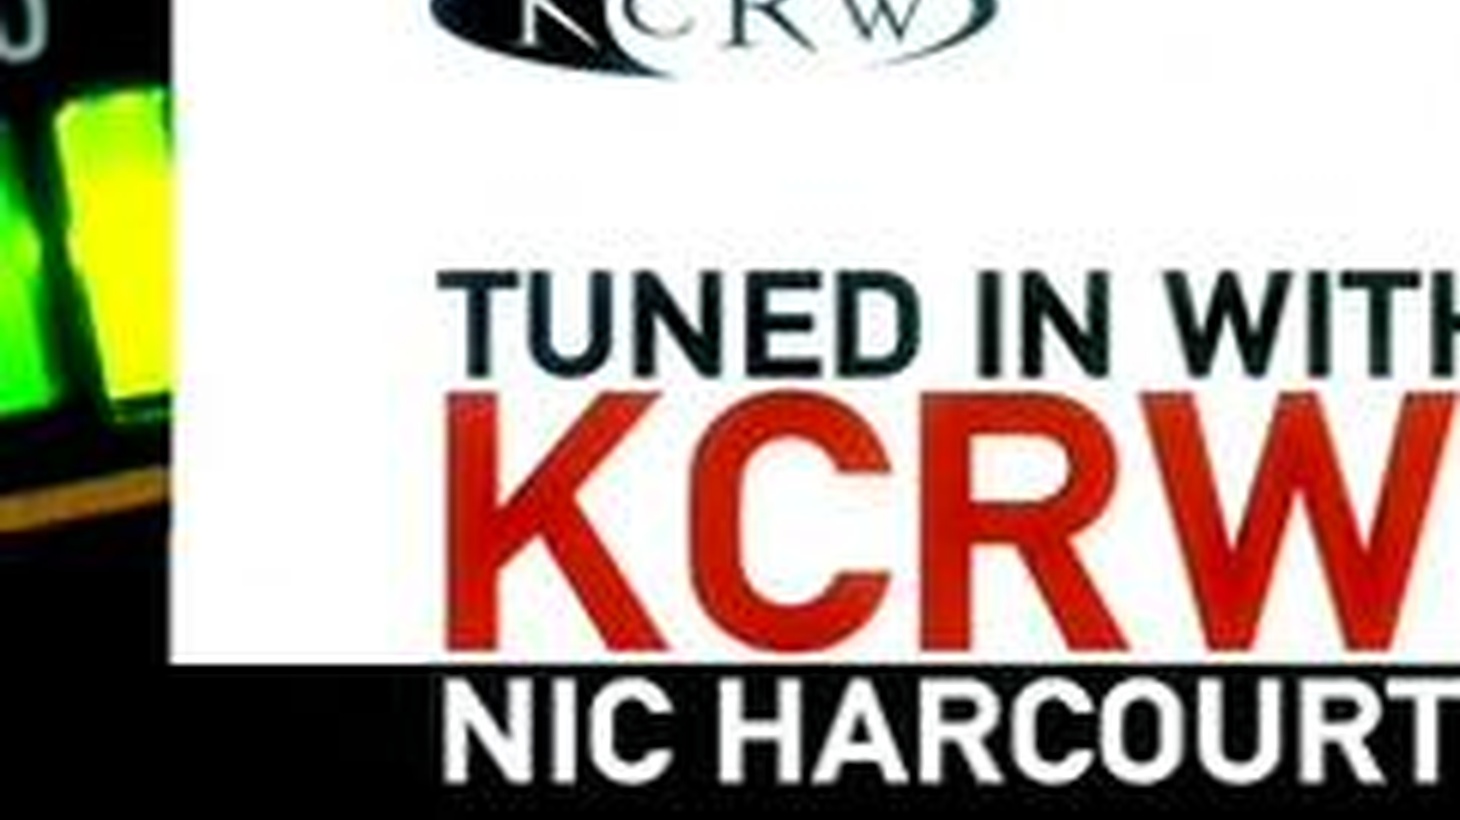 Nic Harcourt gives a weekly look at the music he is featuring on KCRW. In this episode of Tuned In with KCRW’s Nic Harcourt, Nic shares tracks from new albums by Dr. Dog (FATE), Old Crow Medicine Show (TENNESSEE PUSHER)...